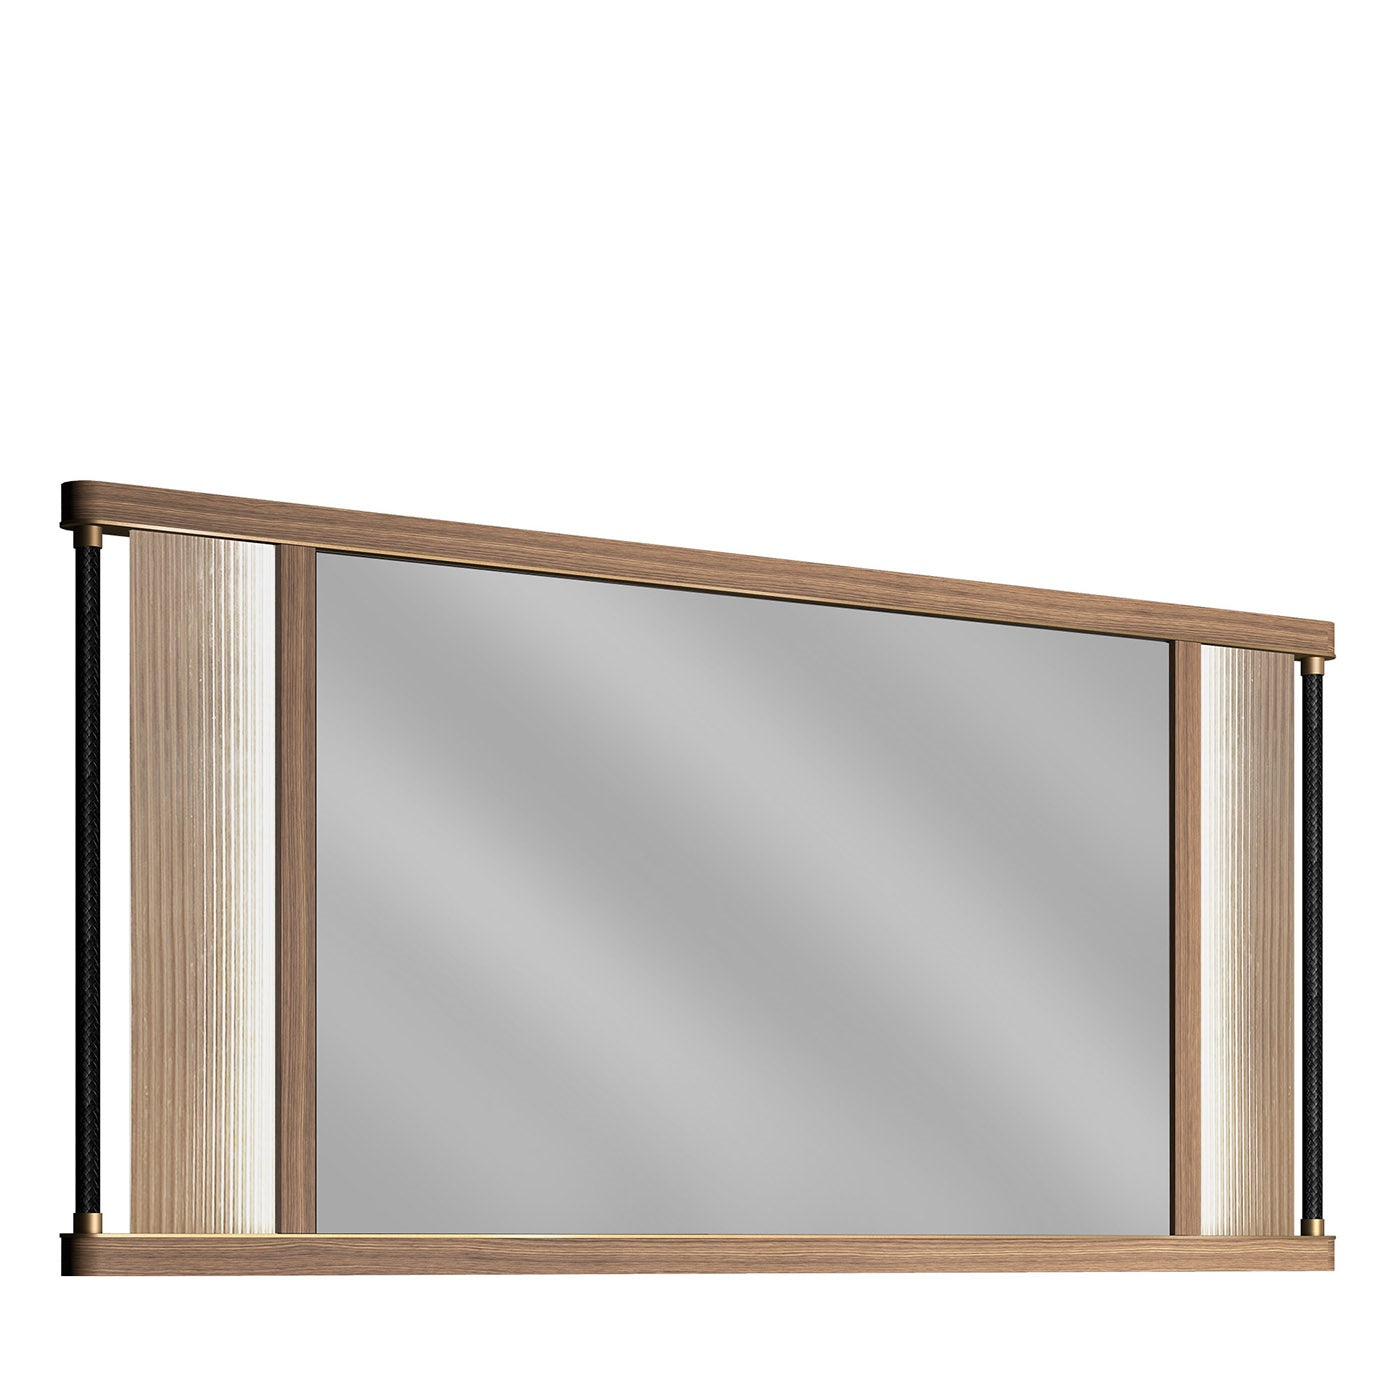 Chinè Wall Mirror with Integrated 43" TV by Alfredo Colombo - Main view